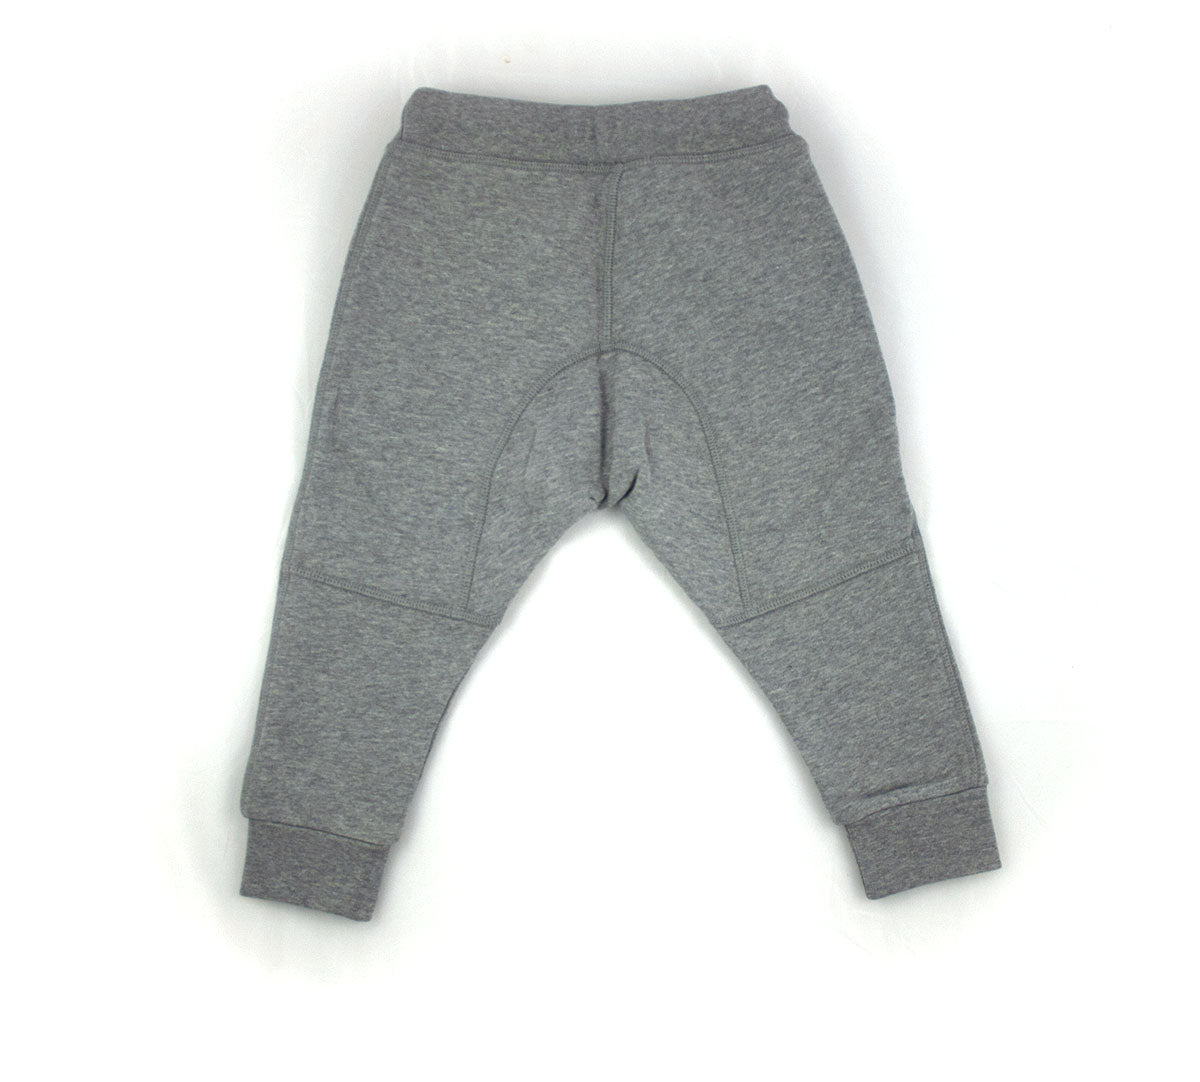 Dsquared2 Boy gray sports trousers